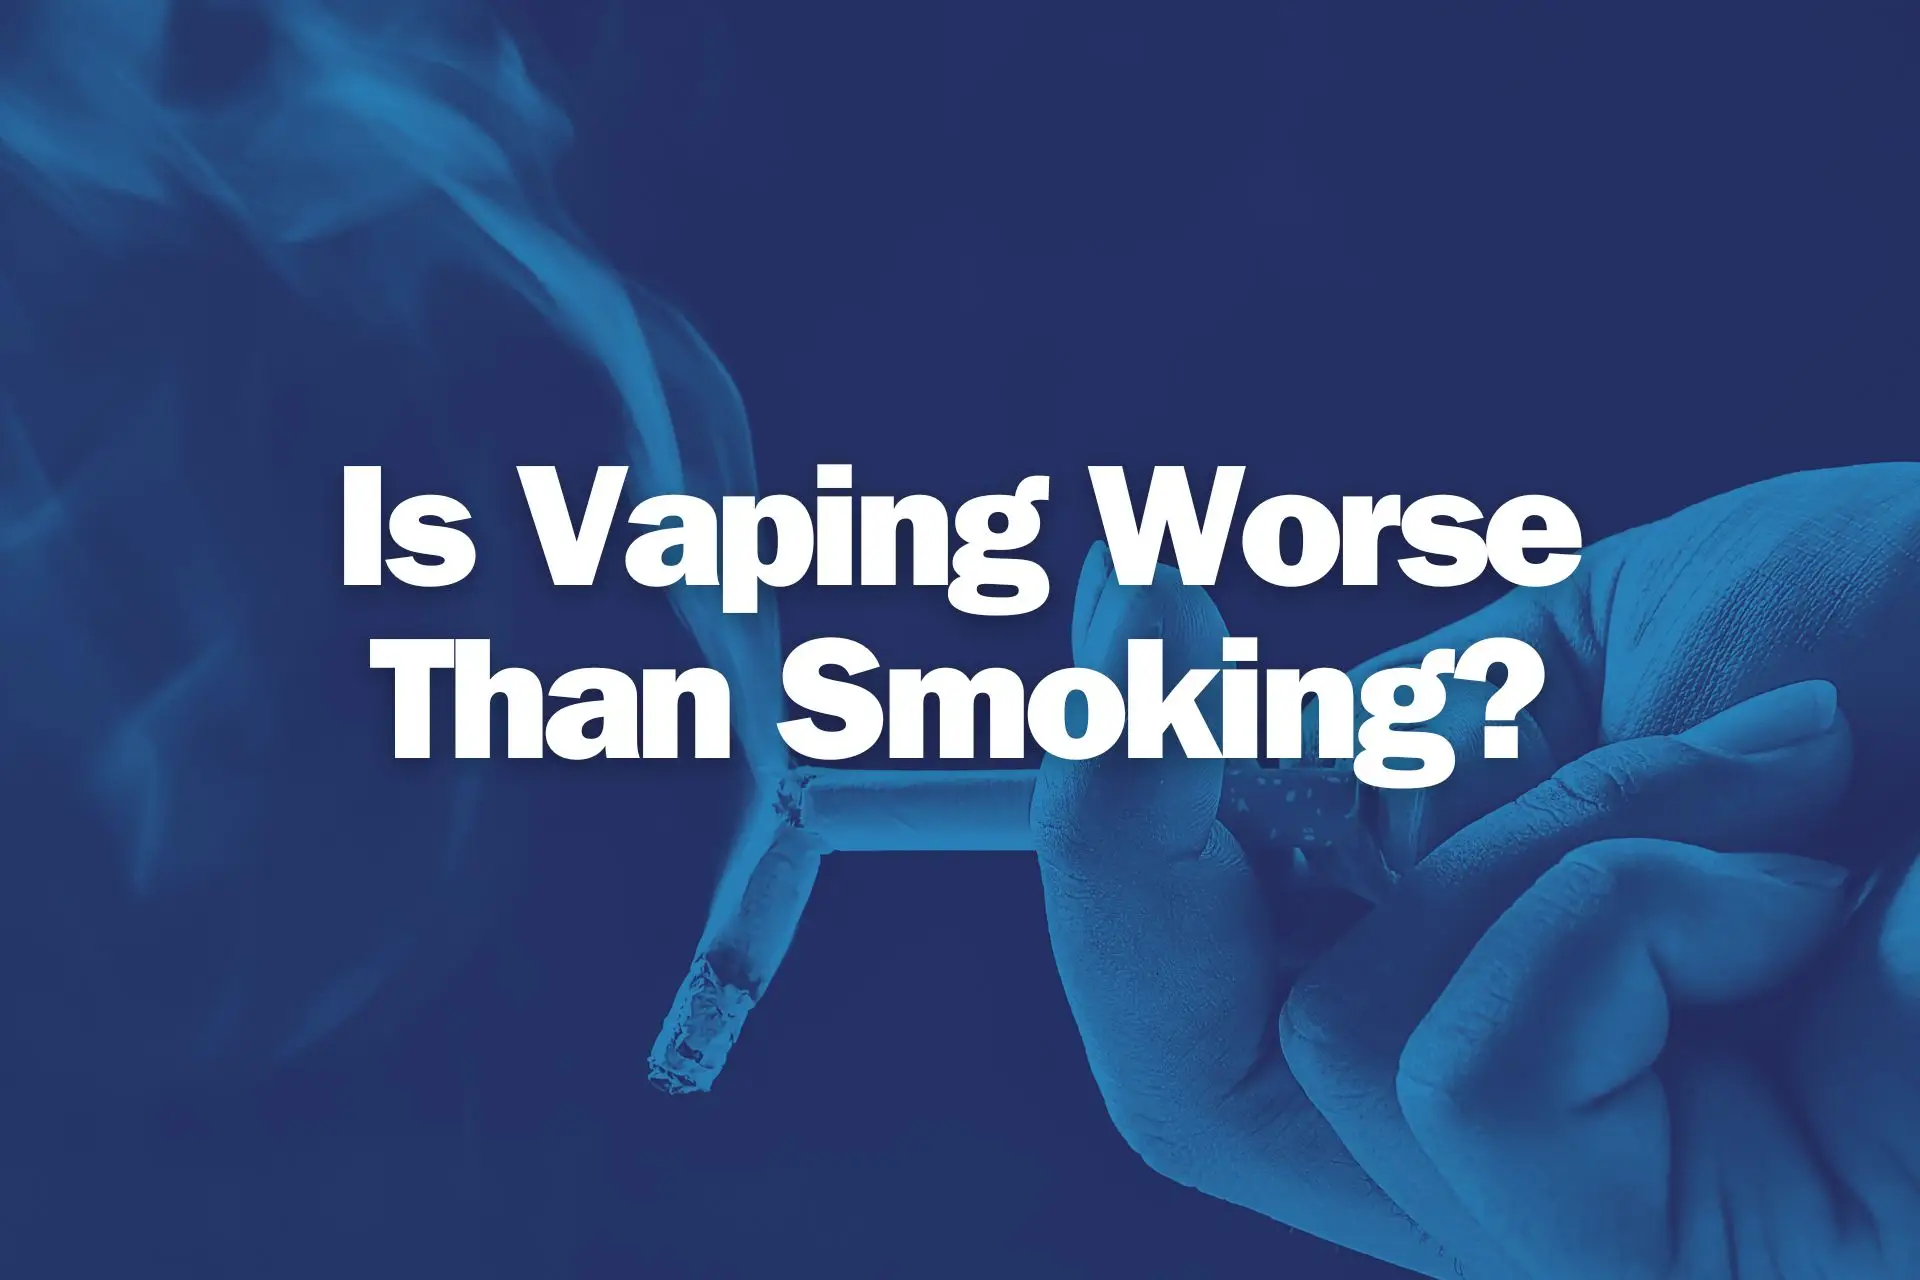 A hand holding a cigarette with a blue outline as a cover color and the text "Is Vaping Worse Than Smoking?"